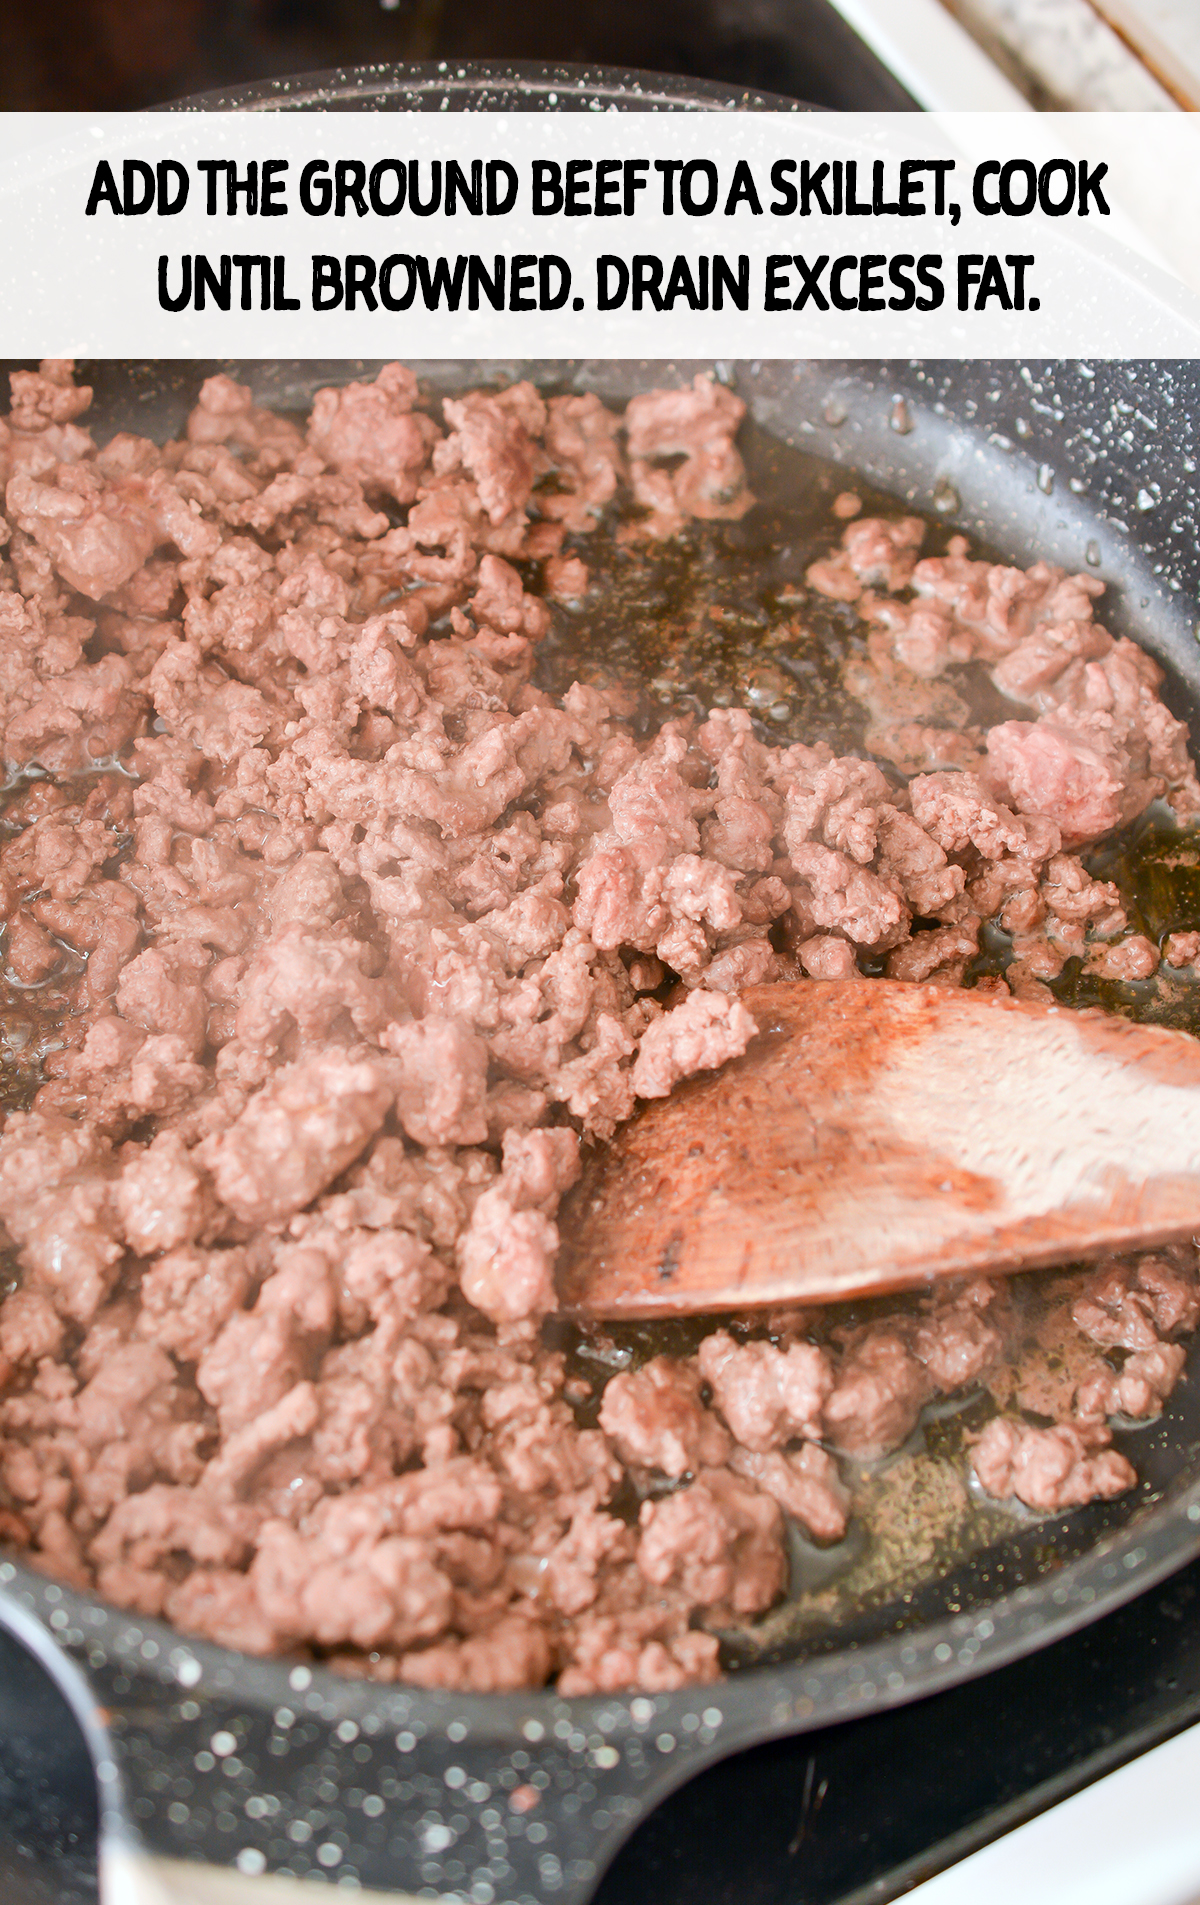 Add the ground beef to a skillet over medium-high heat on the stove, and cook until completely browned